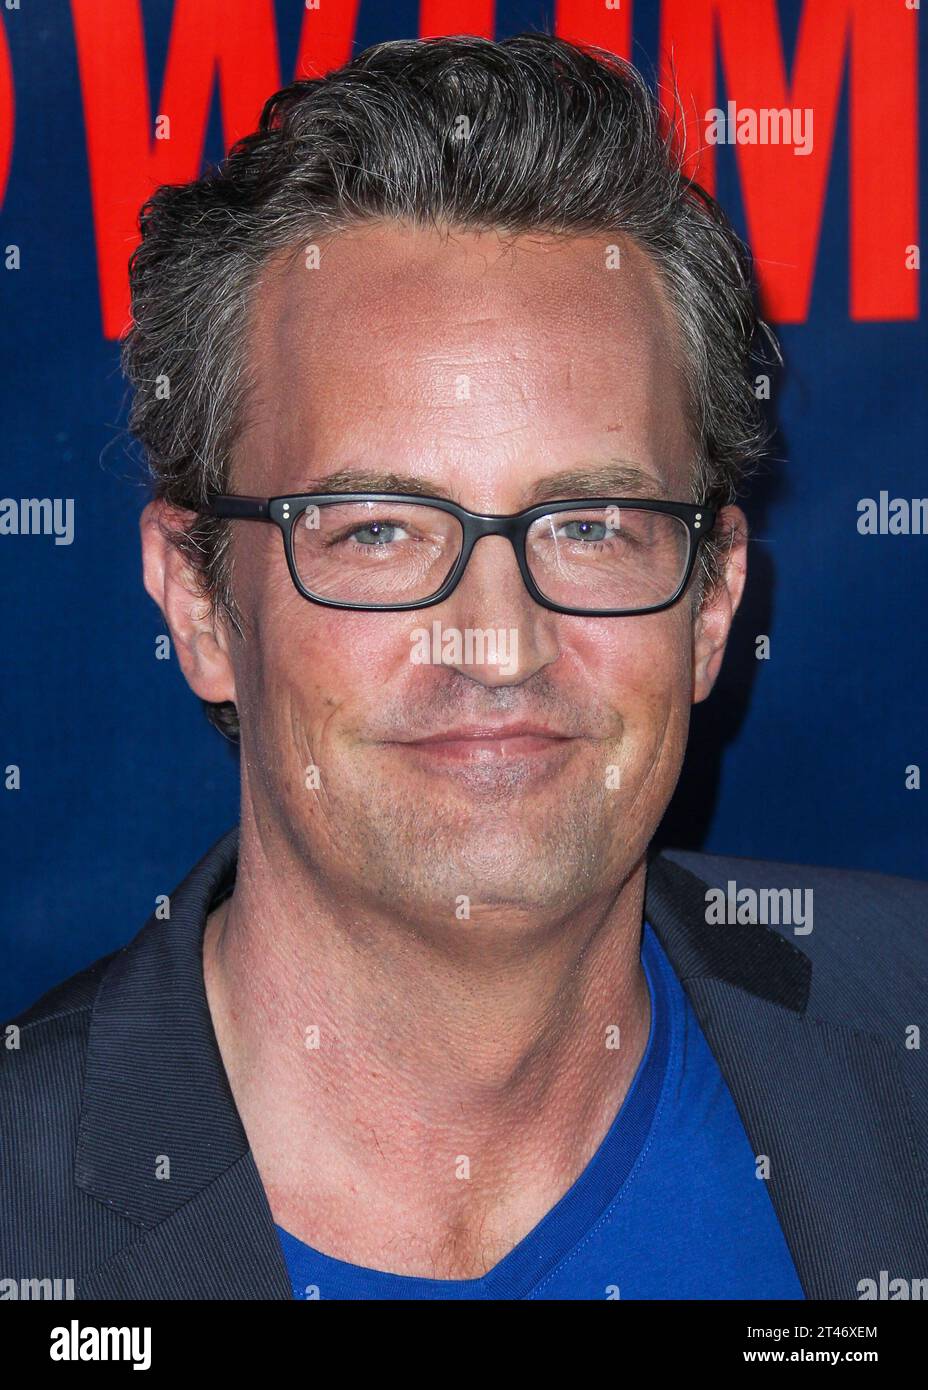 (FILE) Matthew Perry Dead At 54. Matthew Perry has died. He was 54. The actor, who was best known for playing Chandler Bing on 'Friends', was found dead at a Los Angeles-area home on Saturday, October 28, 2023. WEST HOLLYWOOD, LOS ANGELES, CALIFORNIA, USA - JULY 17: American-Canadian actor, comedian and producer Matthew Perry (Matthew Langford Perry) arrives at the CBS, CW And Showtime 2014 Summer TCA Party held at the Pacific Design Center on July 14, 2014 in West Hollywood, Los Angeles, California, United States. (Photo by Xavier Collin/Image Press Agency) Stock Photo